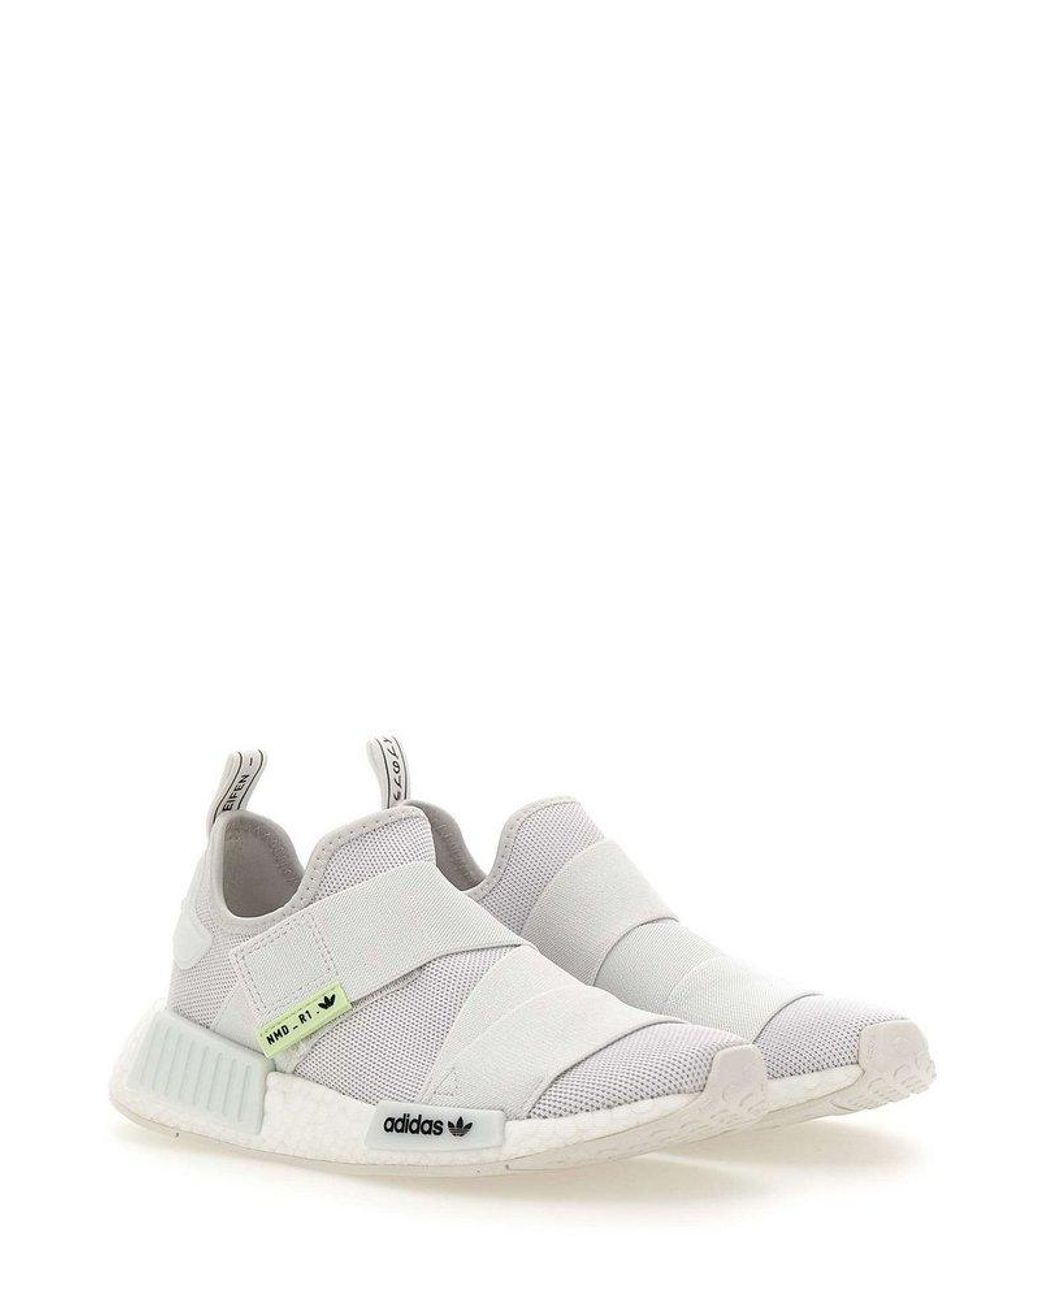 adidas Originals Nmd R1 Slip-on Sneakers in White | Lyst